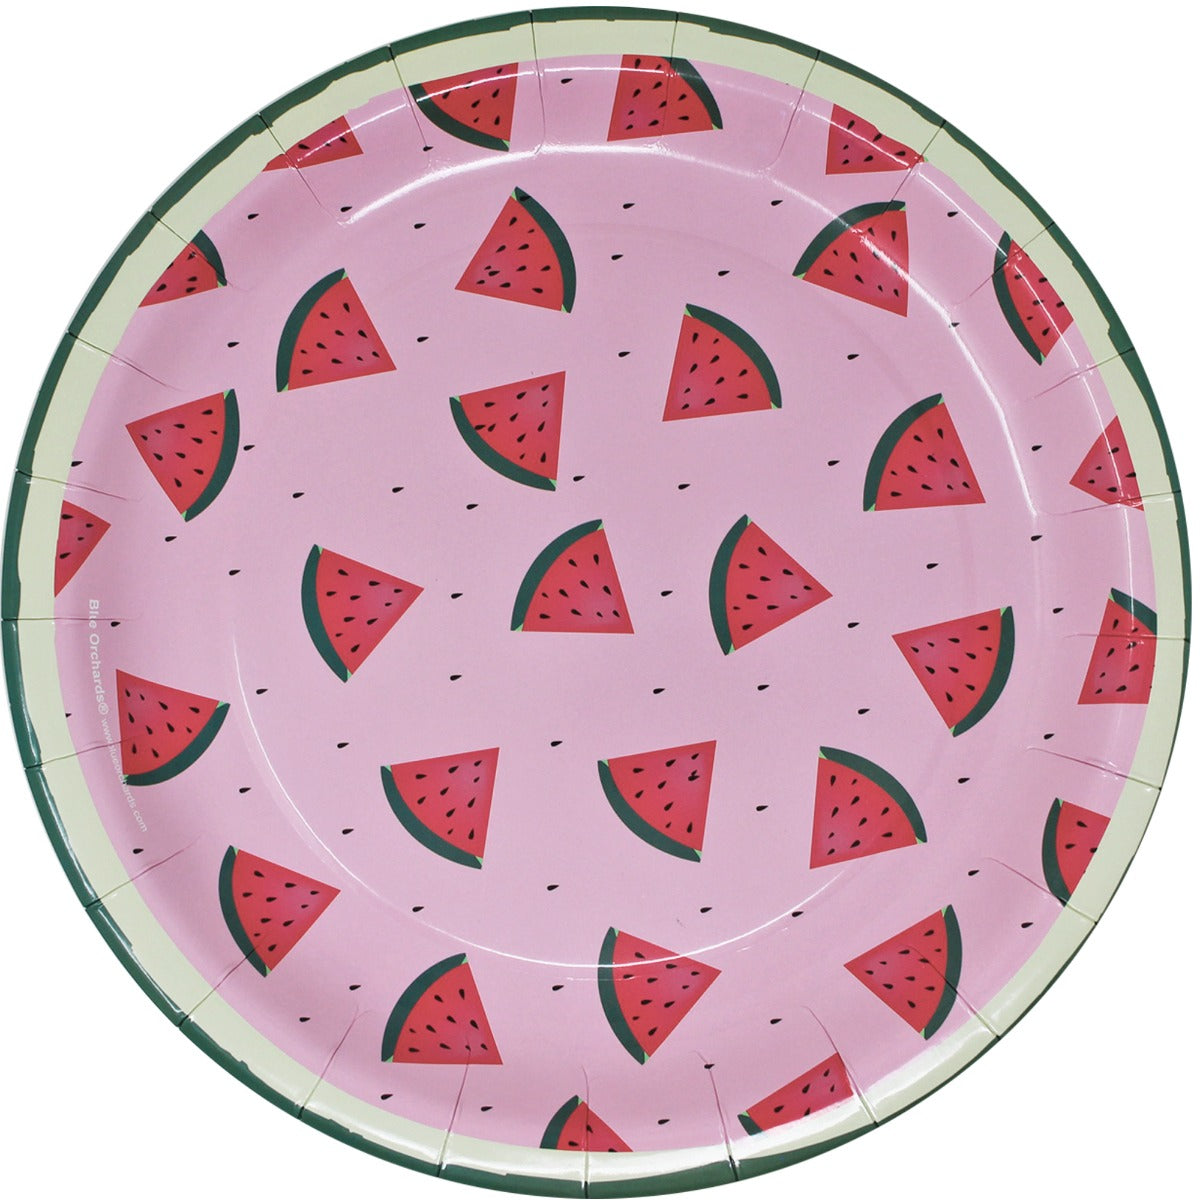 watermelon party theme
watermelon plates and napkins
watermelon party plates
watermelon decorations for birthday
watermelon party balloon set
watermelon party decor
watermelon plates party supplies
watermelon first birthday